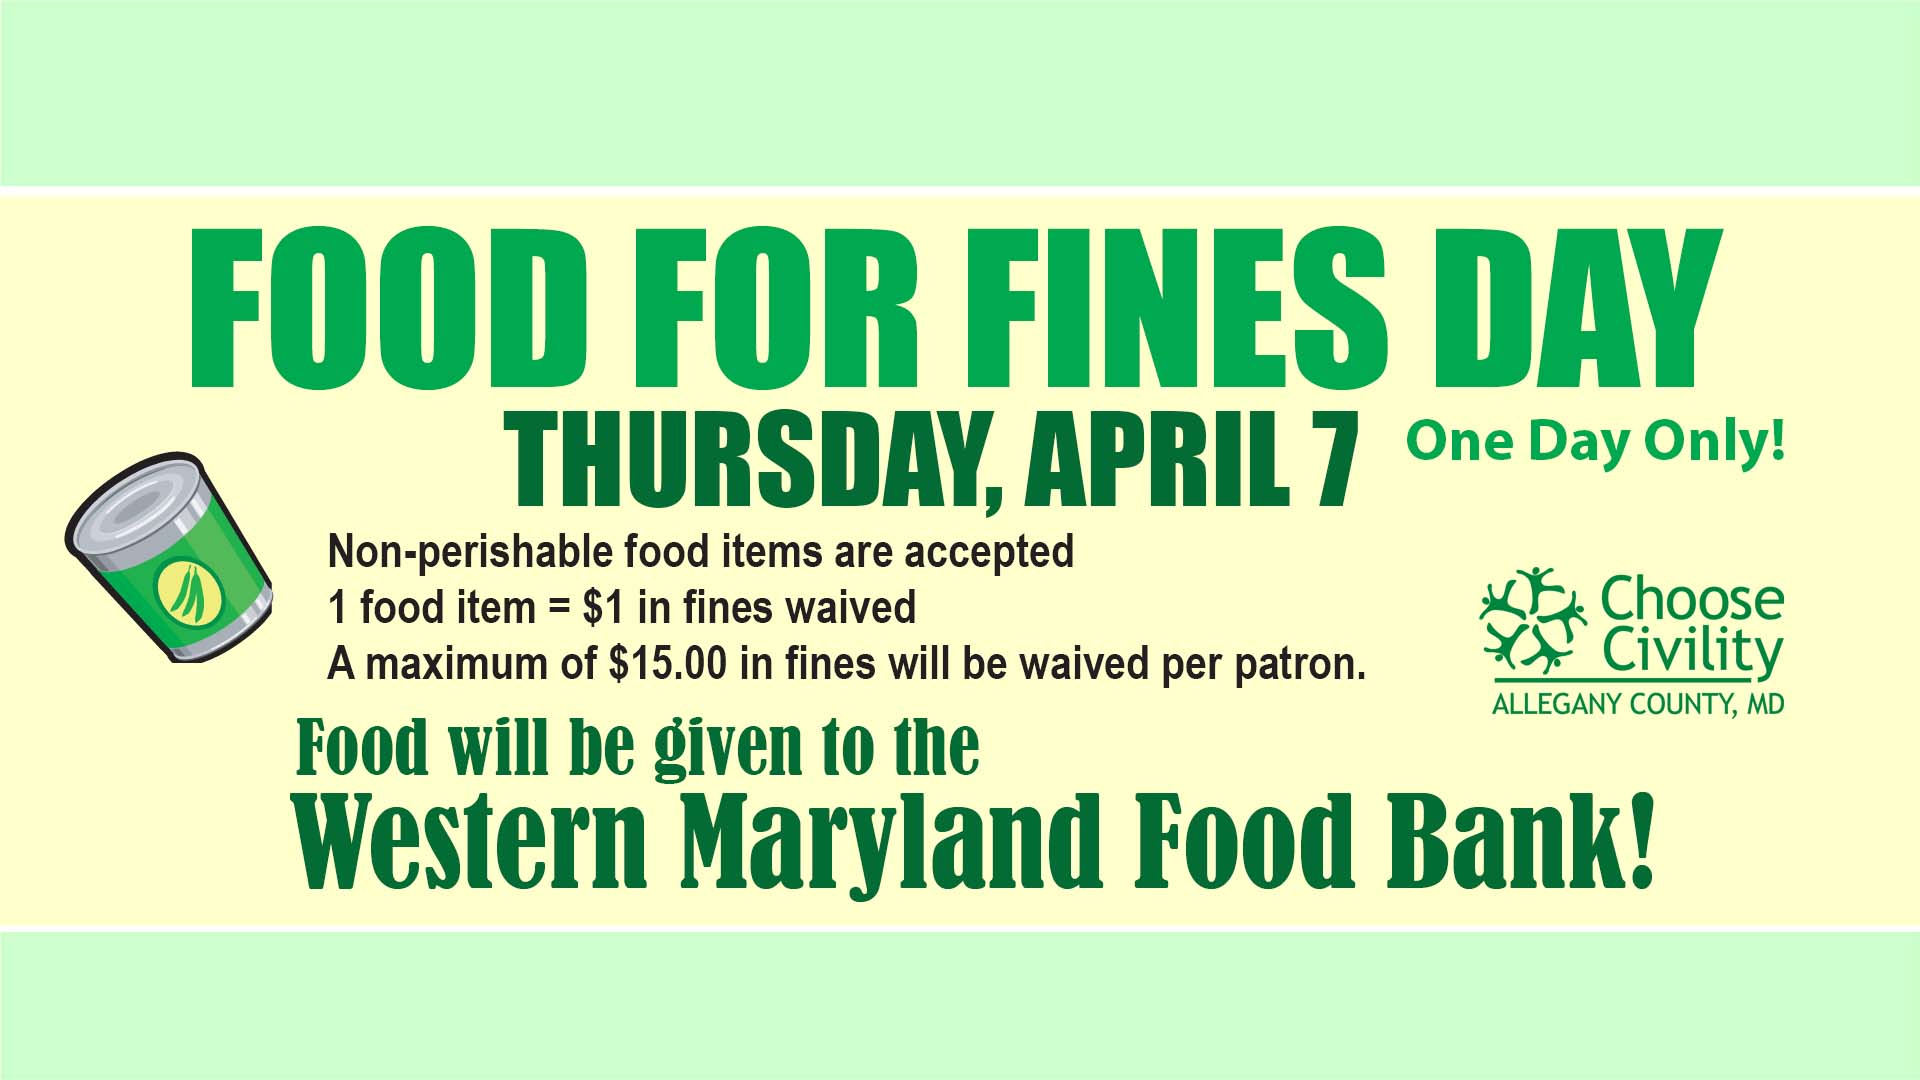 food for fines event information, clip art of a canned good, ACLS logo, Choose Civility logo